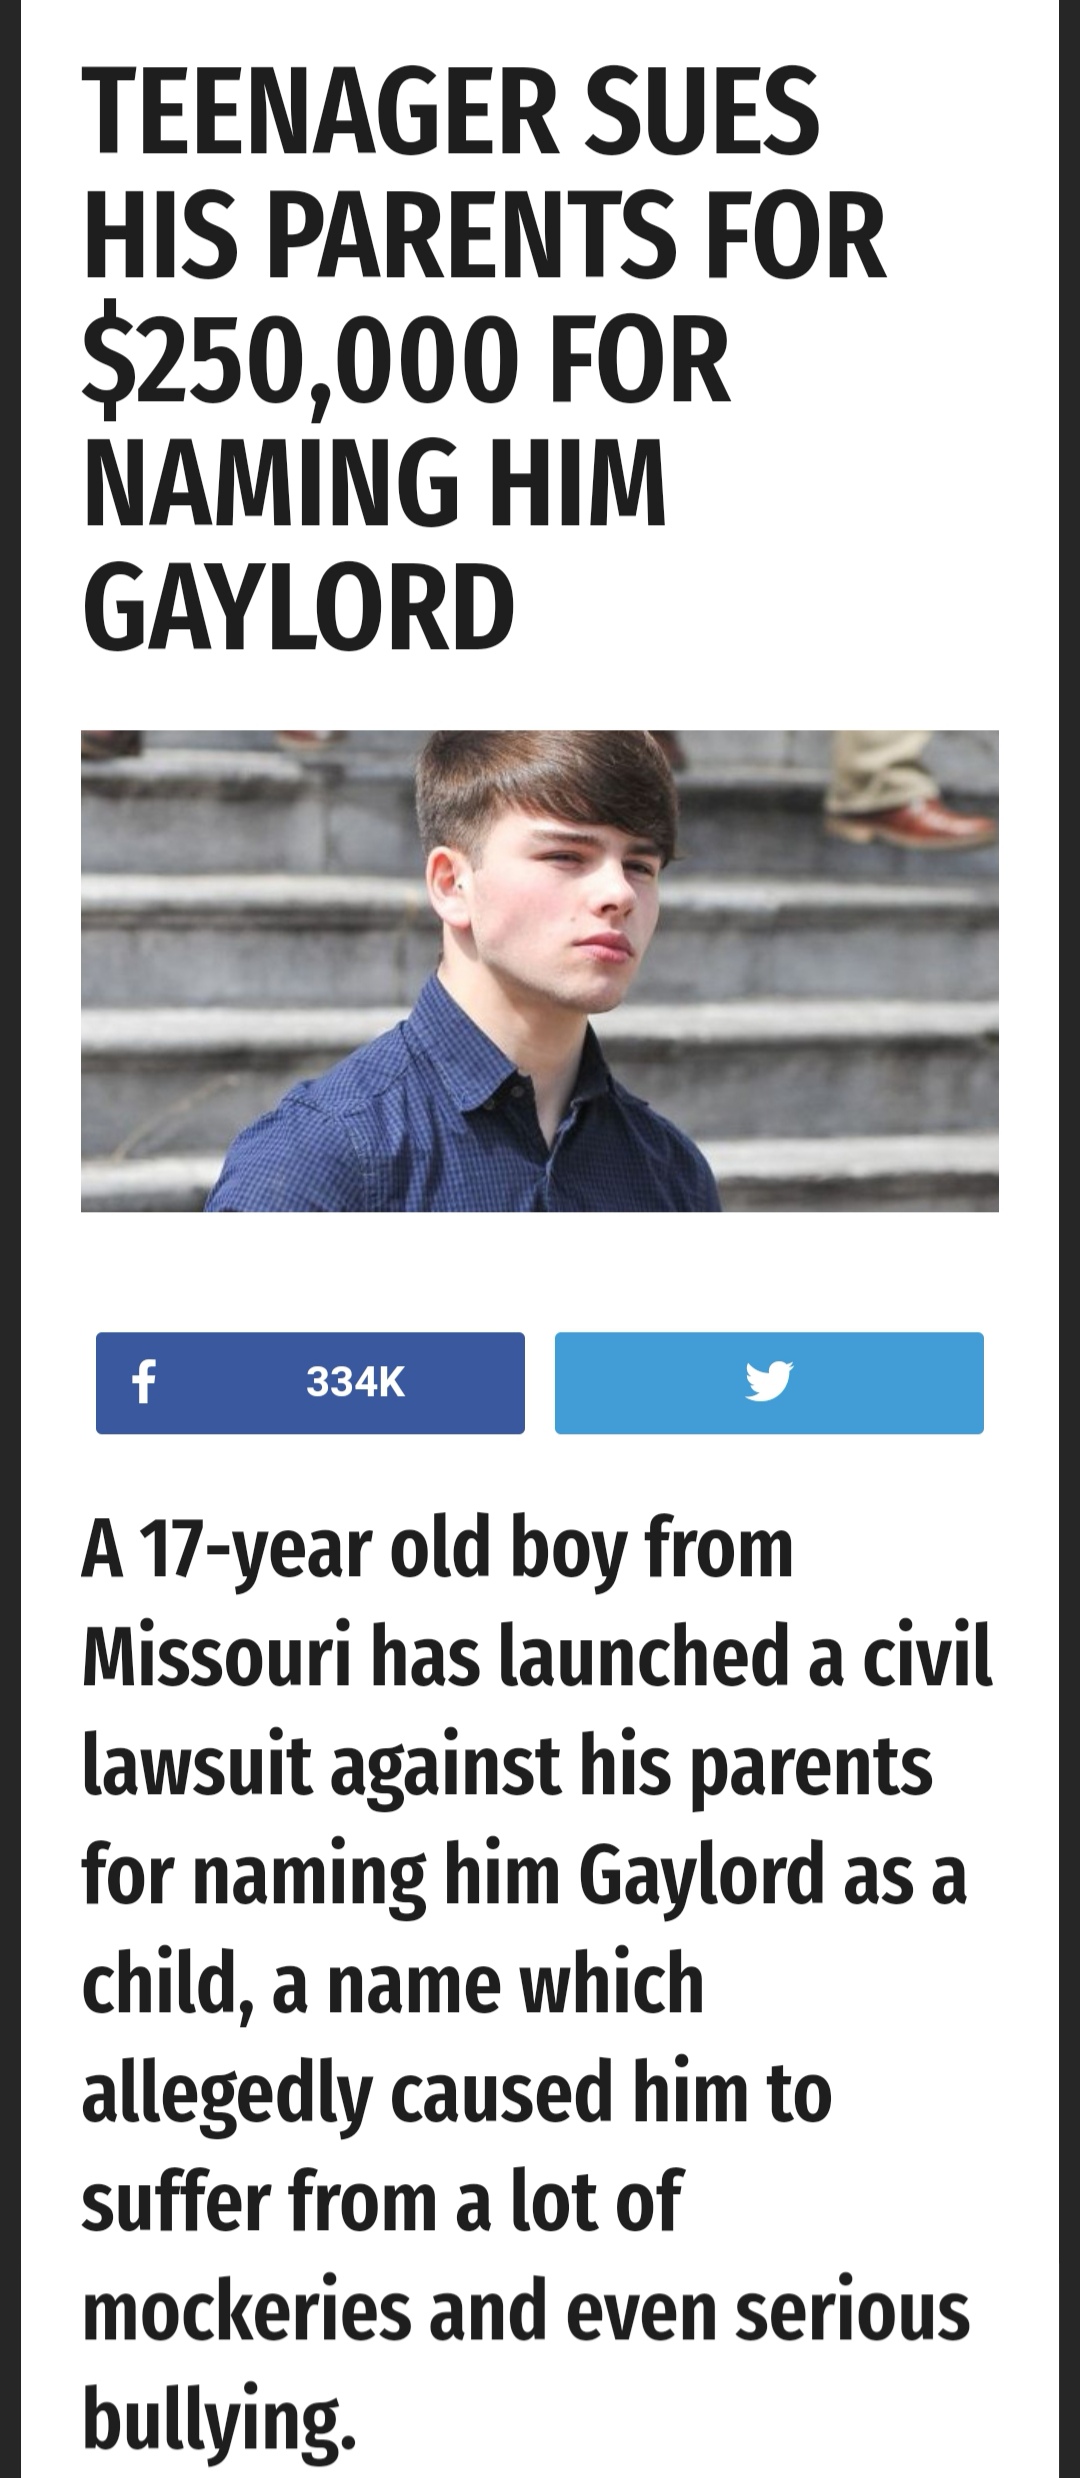 pericolo alta tensione - Teenager Sues His Parents For $250,000 For Naming Him Gaylord f A 17year old boy from Missouri has launched a civil lawsuit against his parents for naming him Gaylord as a child, a name which allegedly caused him to suffer from a 